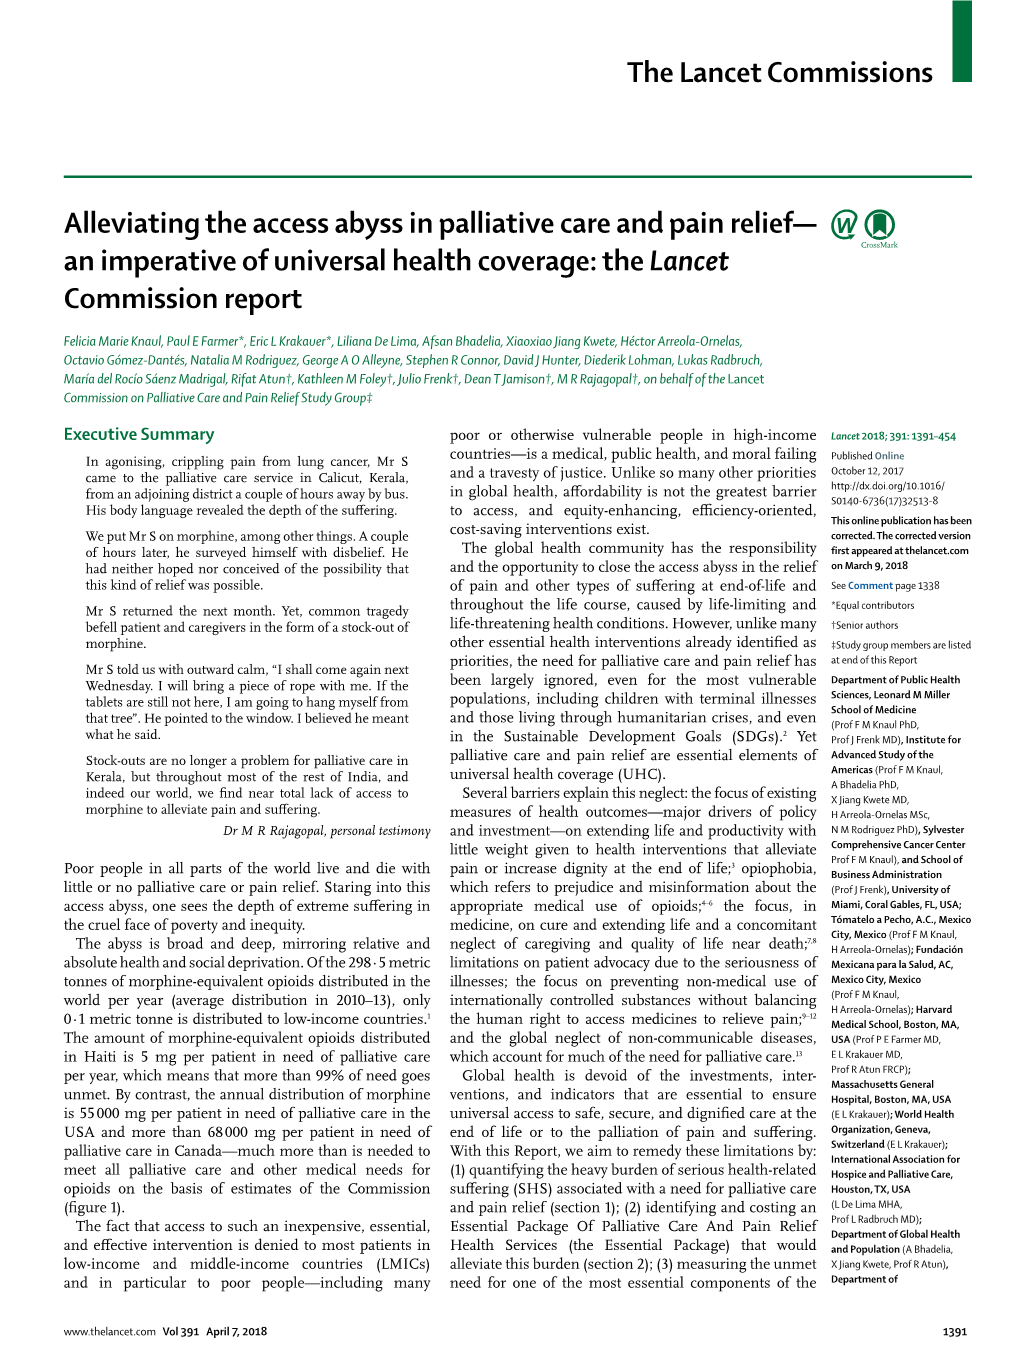 Alleviating the Access Abyss in Palliative Care and Pain Reliefâ